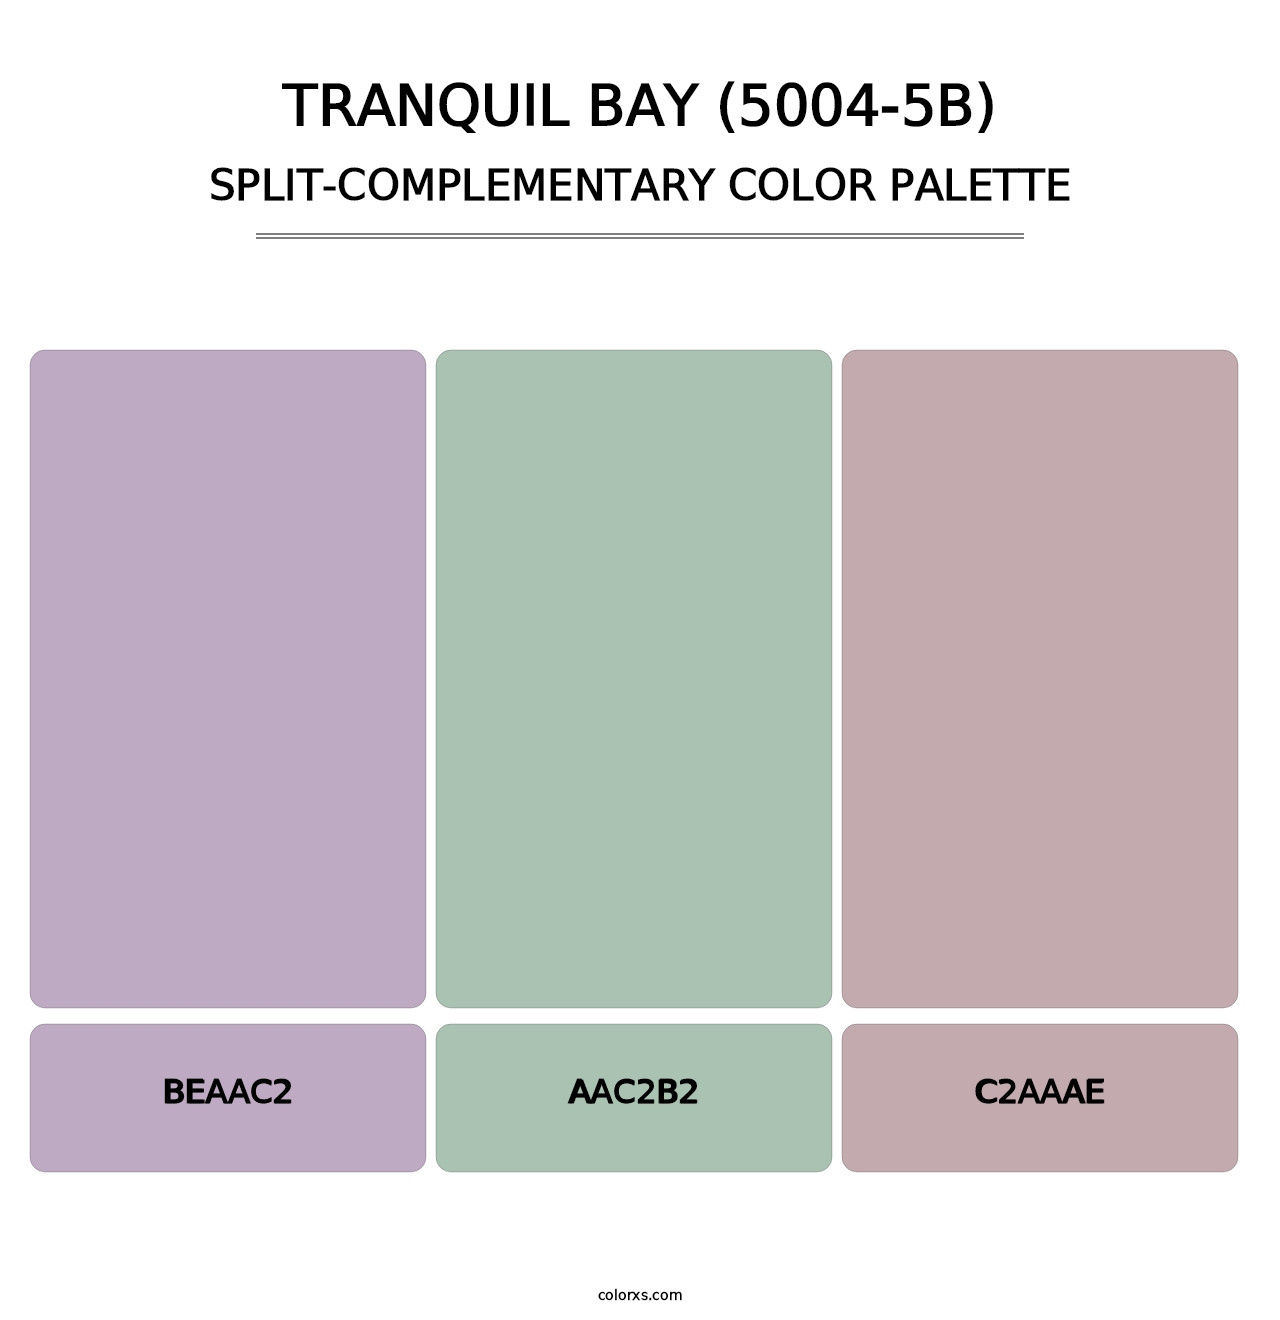 Tranquil Bay (5004-5B) - Split-Complementary Color Palette